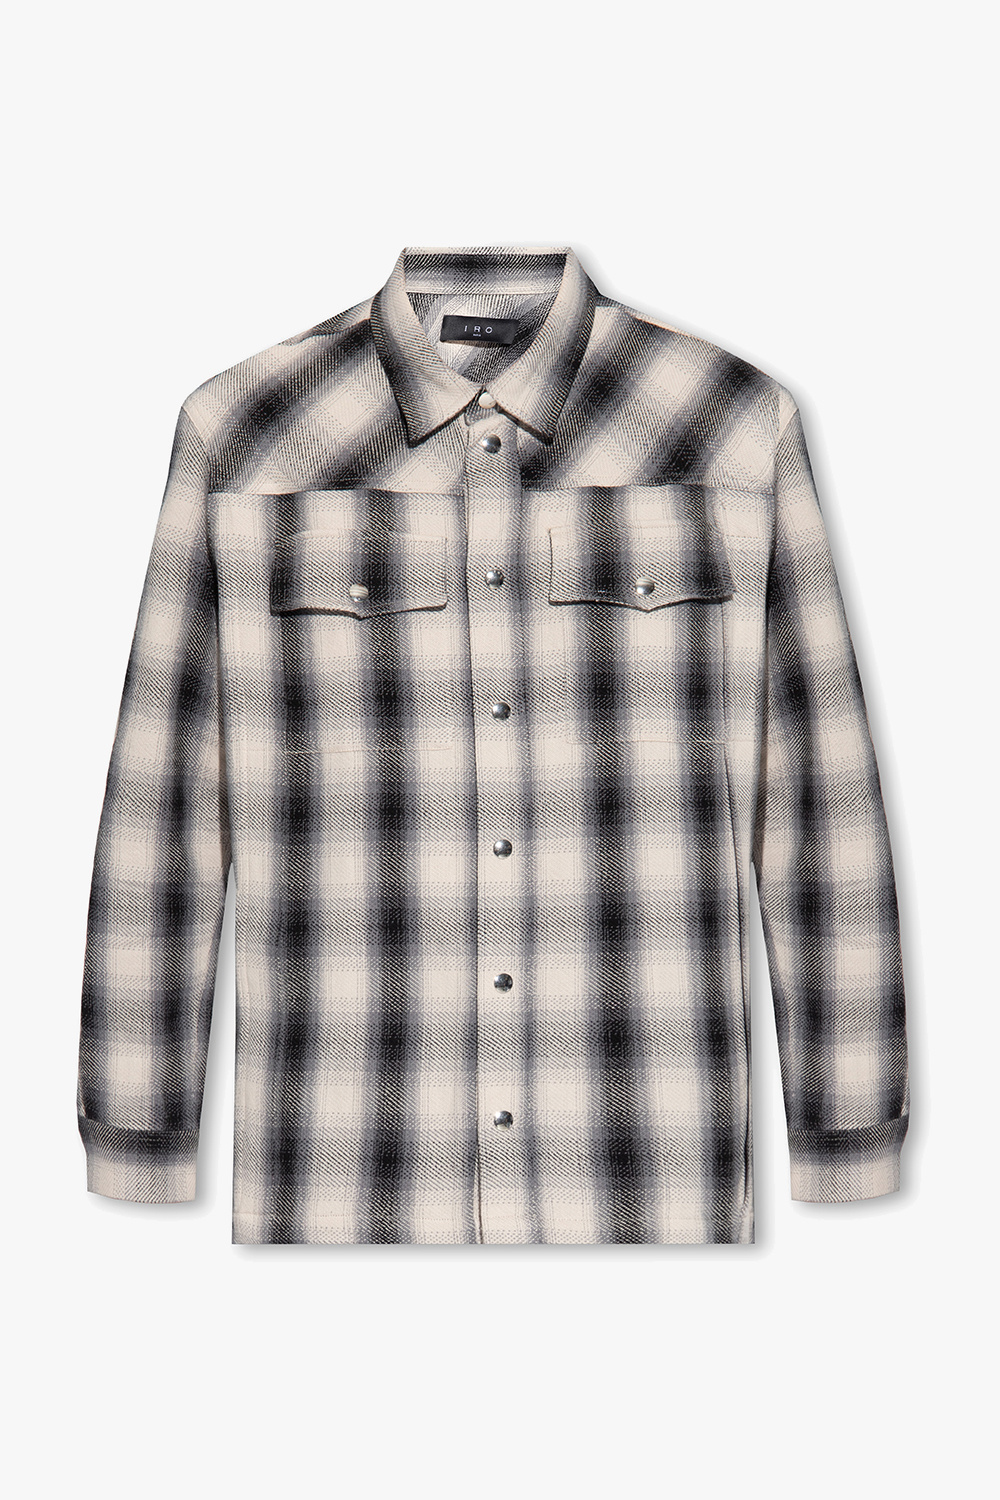 Lucky Brand T-shirts for Men, Online Sale up to 80% off